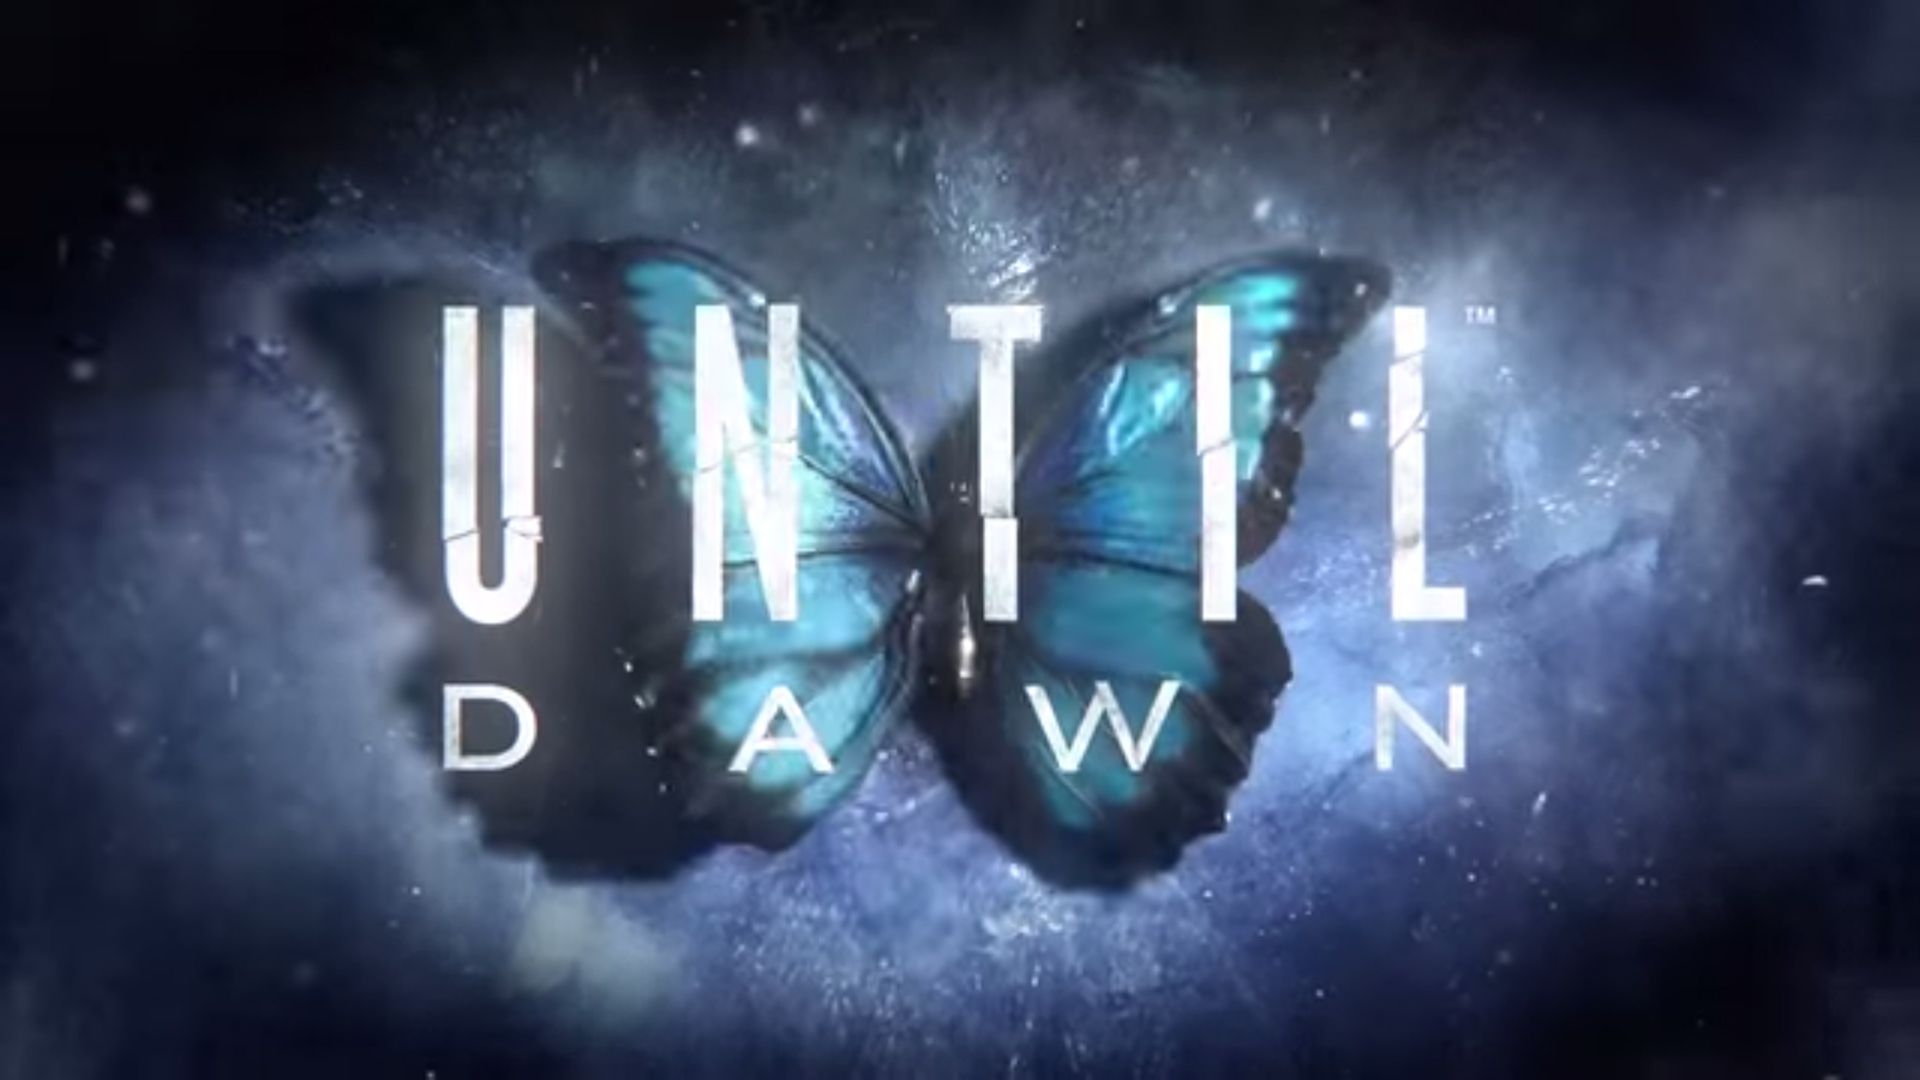 until dawn for pc